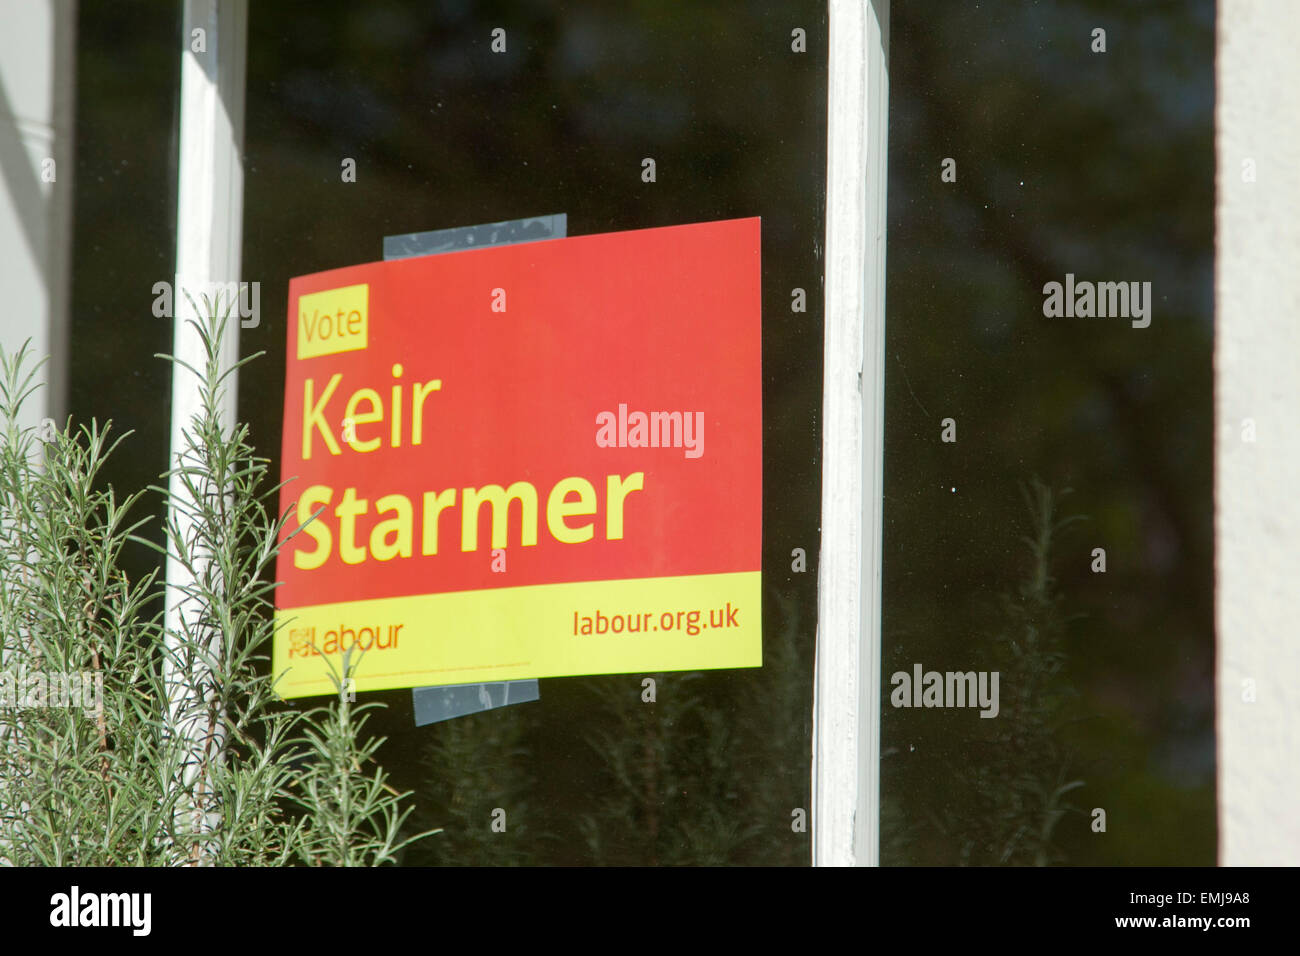 London, UK. 21st April, 2015. Keir Starmer who was former  Director of Public Prosecutions (DPP) and the Head of the Crown Prosecution Service (CPS) from 2008 to 2013 is standing for a Labour seat at the next general election. Stock Photo